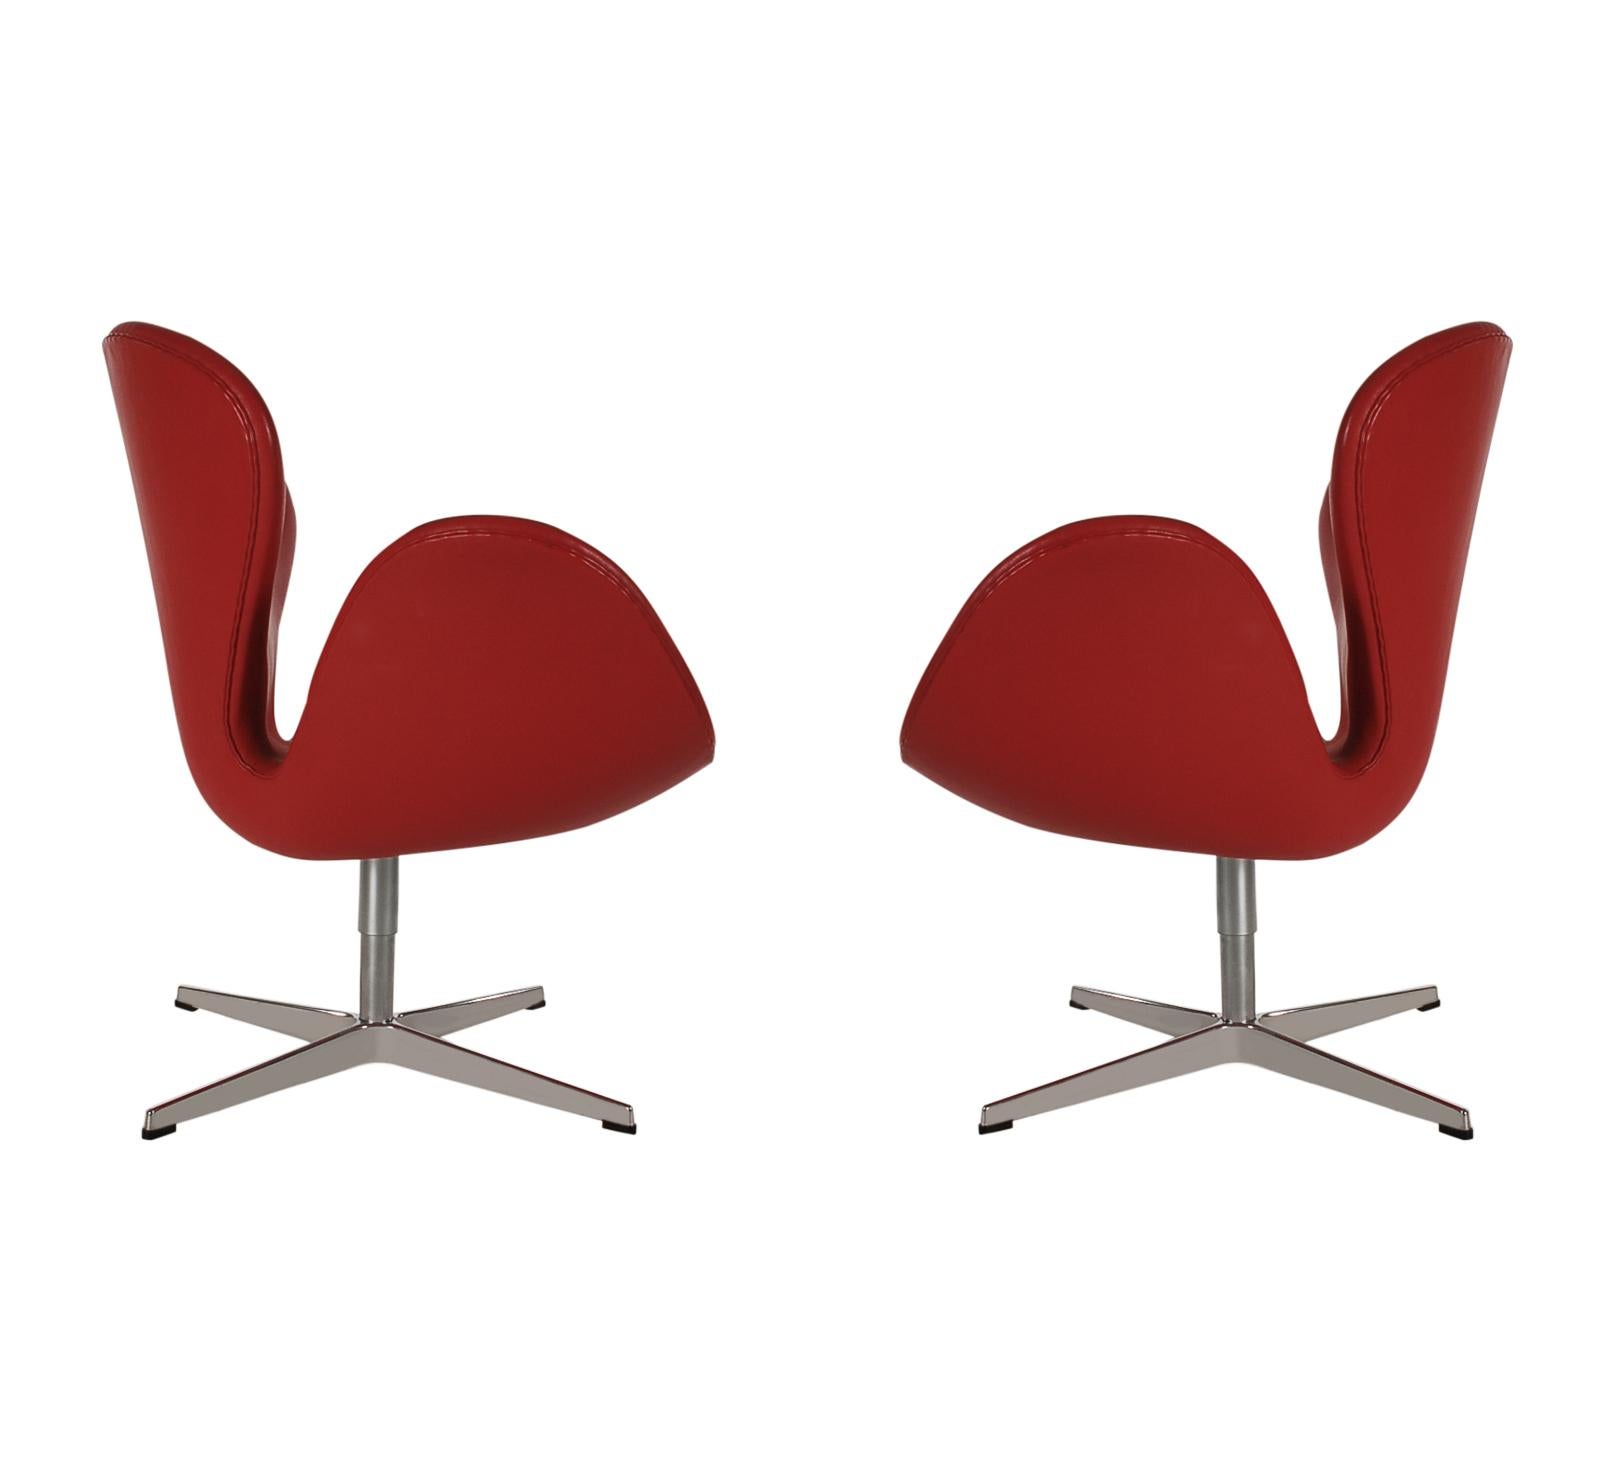 An incredible opportunity to purchase a set of eight matching swan chairs designed by Arne Jacobsen and produced by Fritz Hansen in 2012. These are covered in supple red leather. They all swivel and return to their original position automatically.